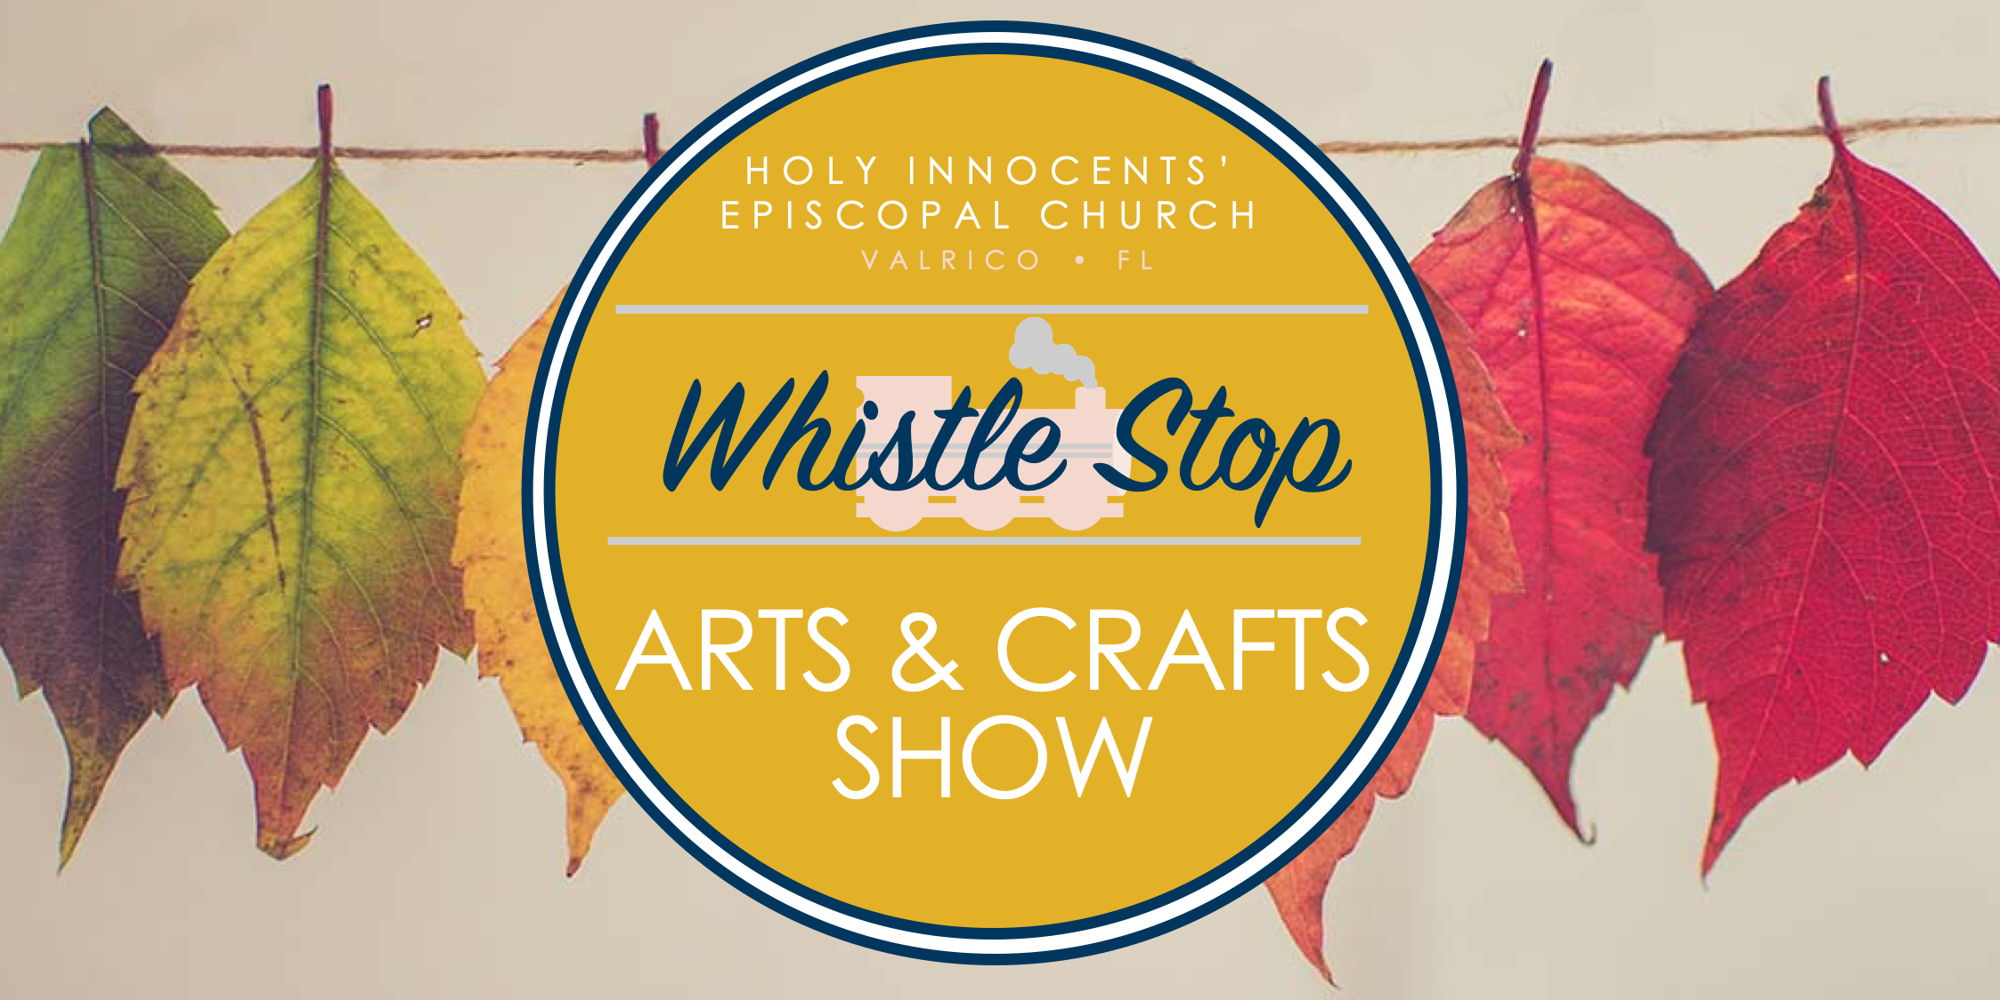 Whistle Stop Fall Craft and Arts Festival promotional image